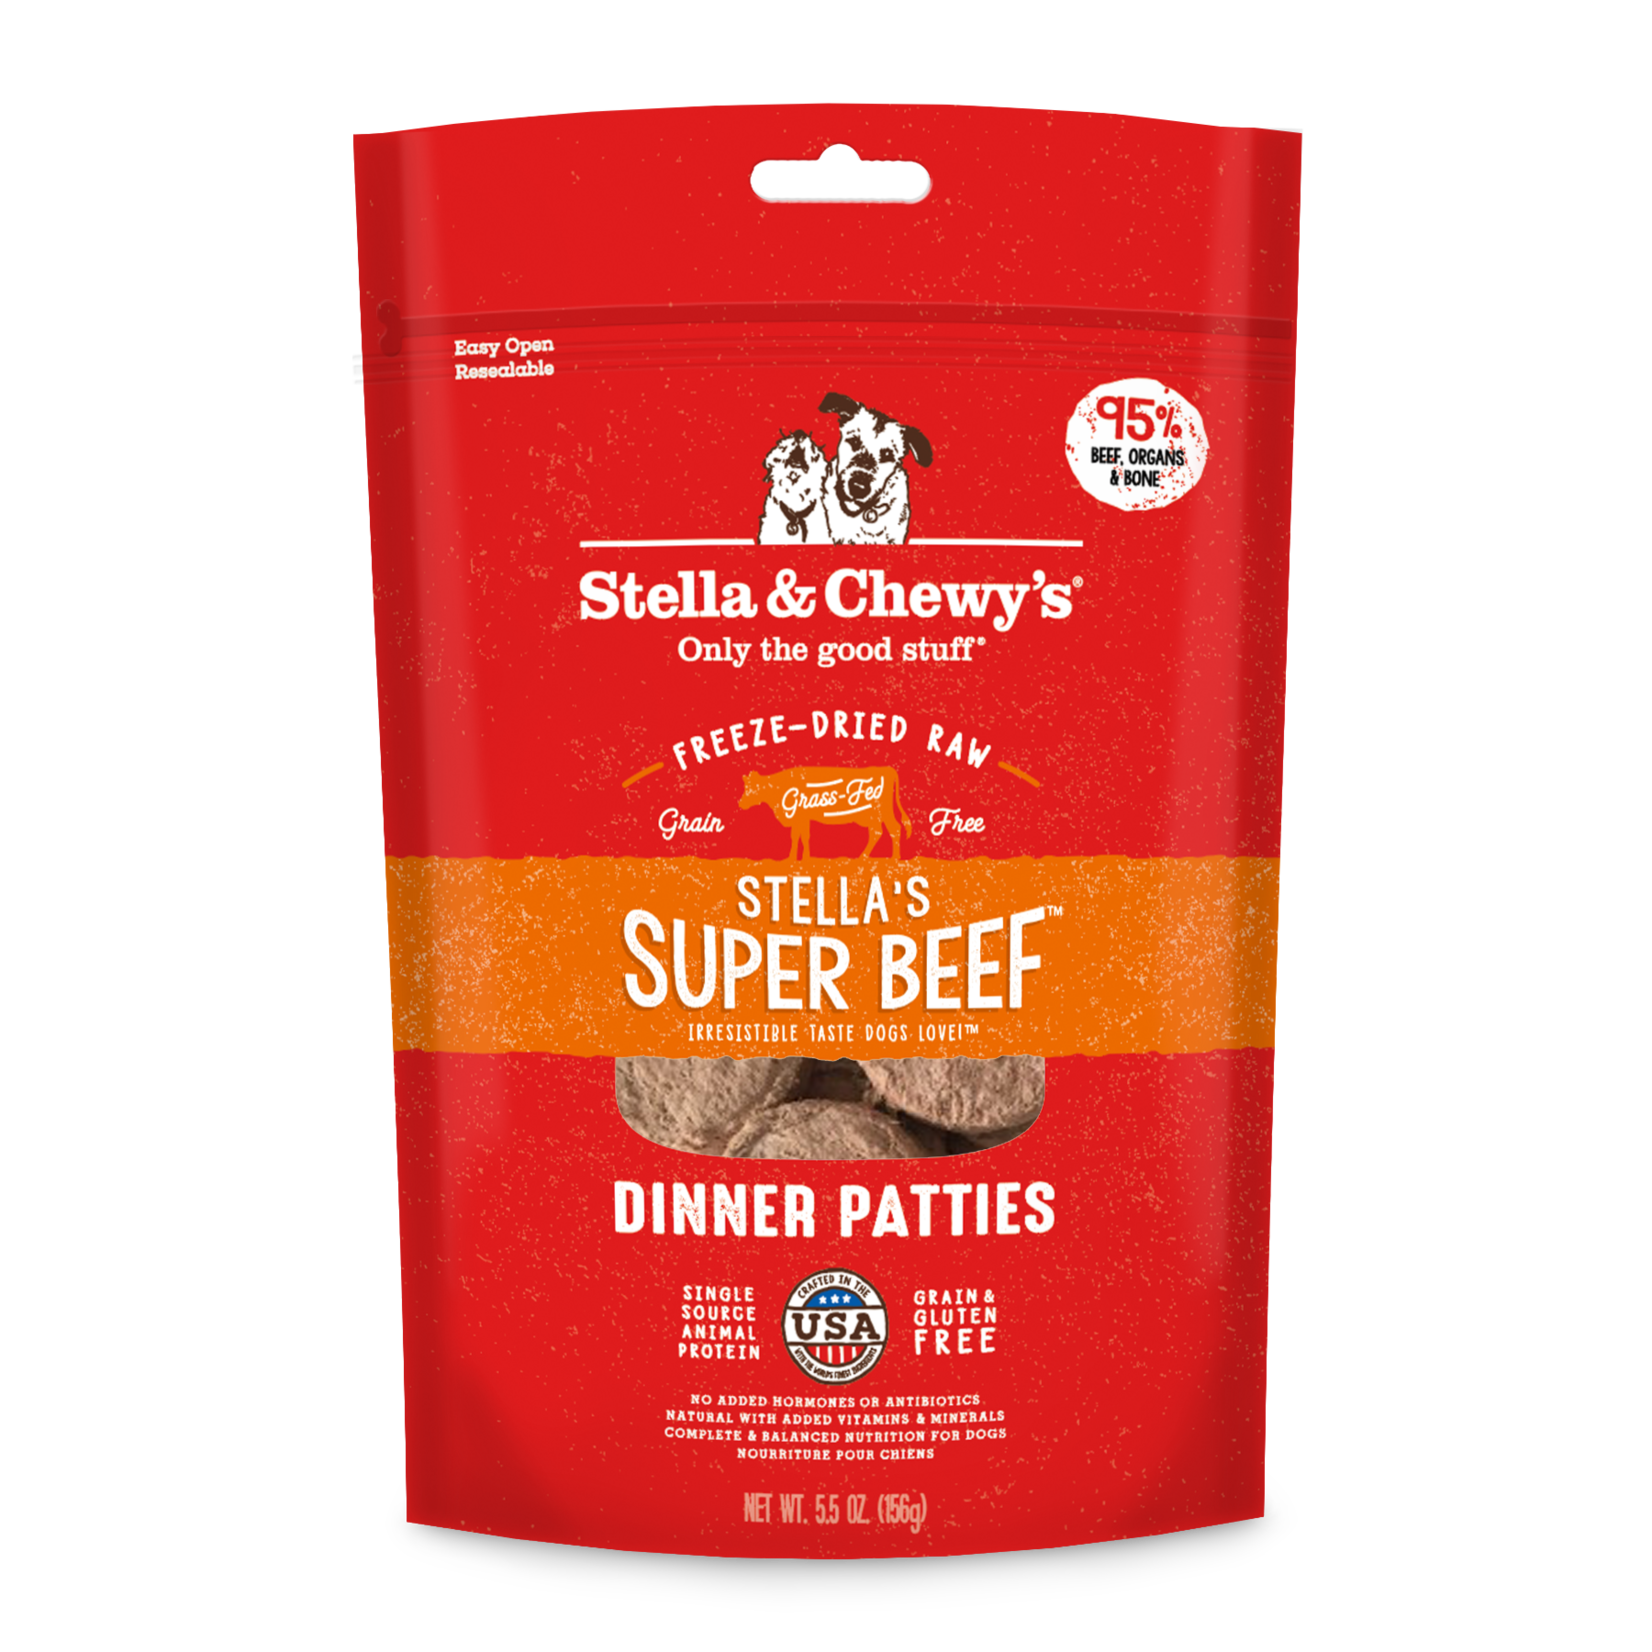 STELLA & CHEWY'S Stella & Chewy's Freeze-Dried Beef